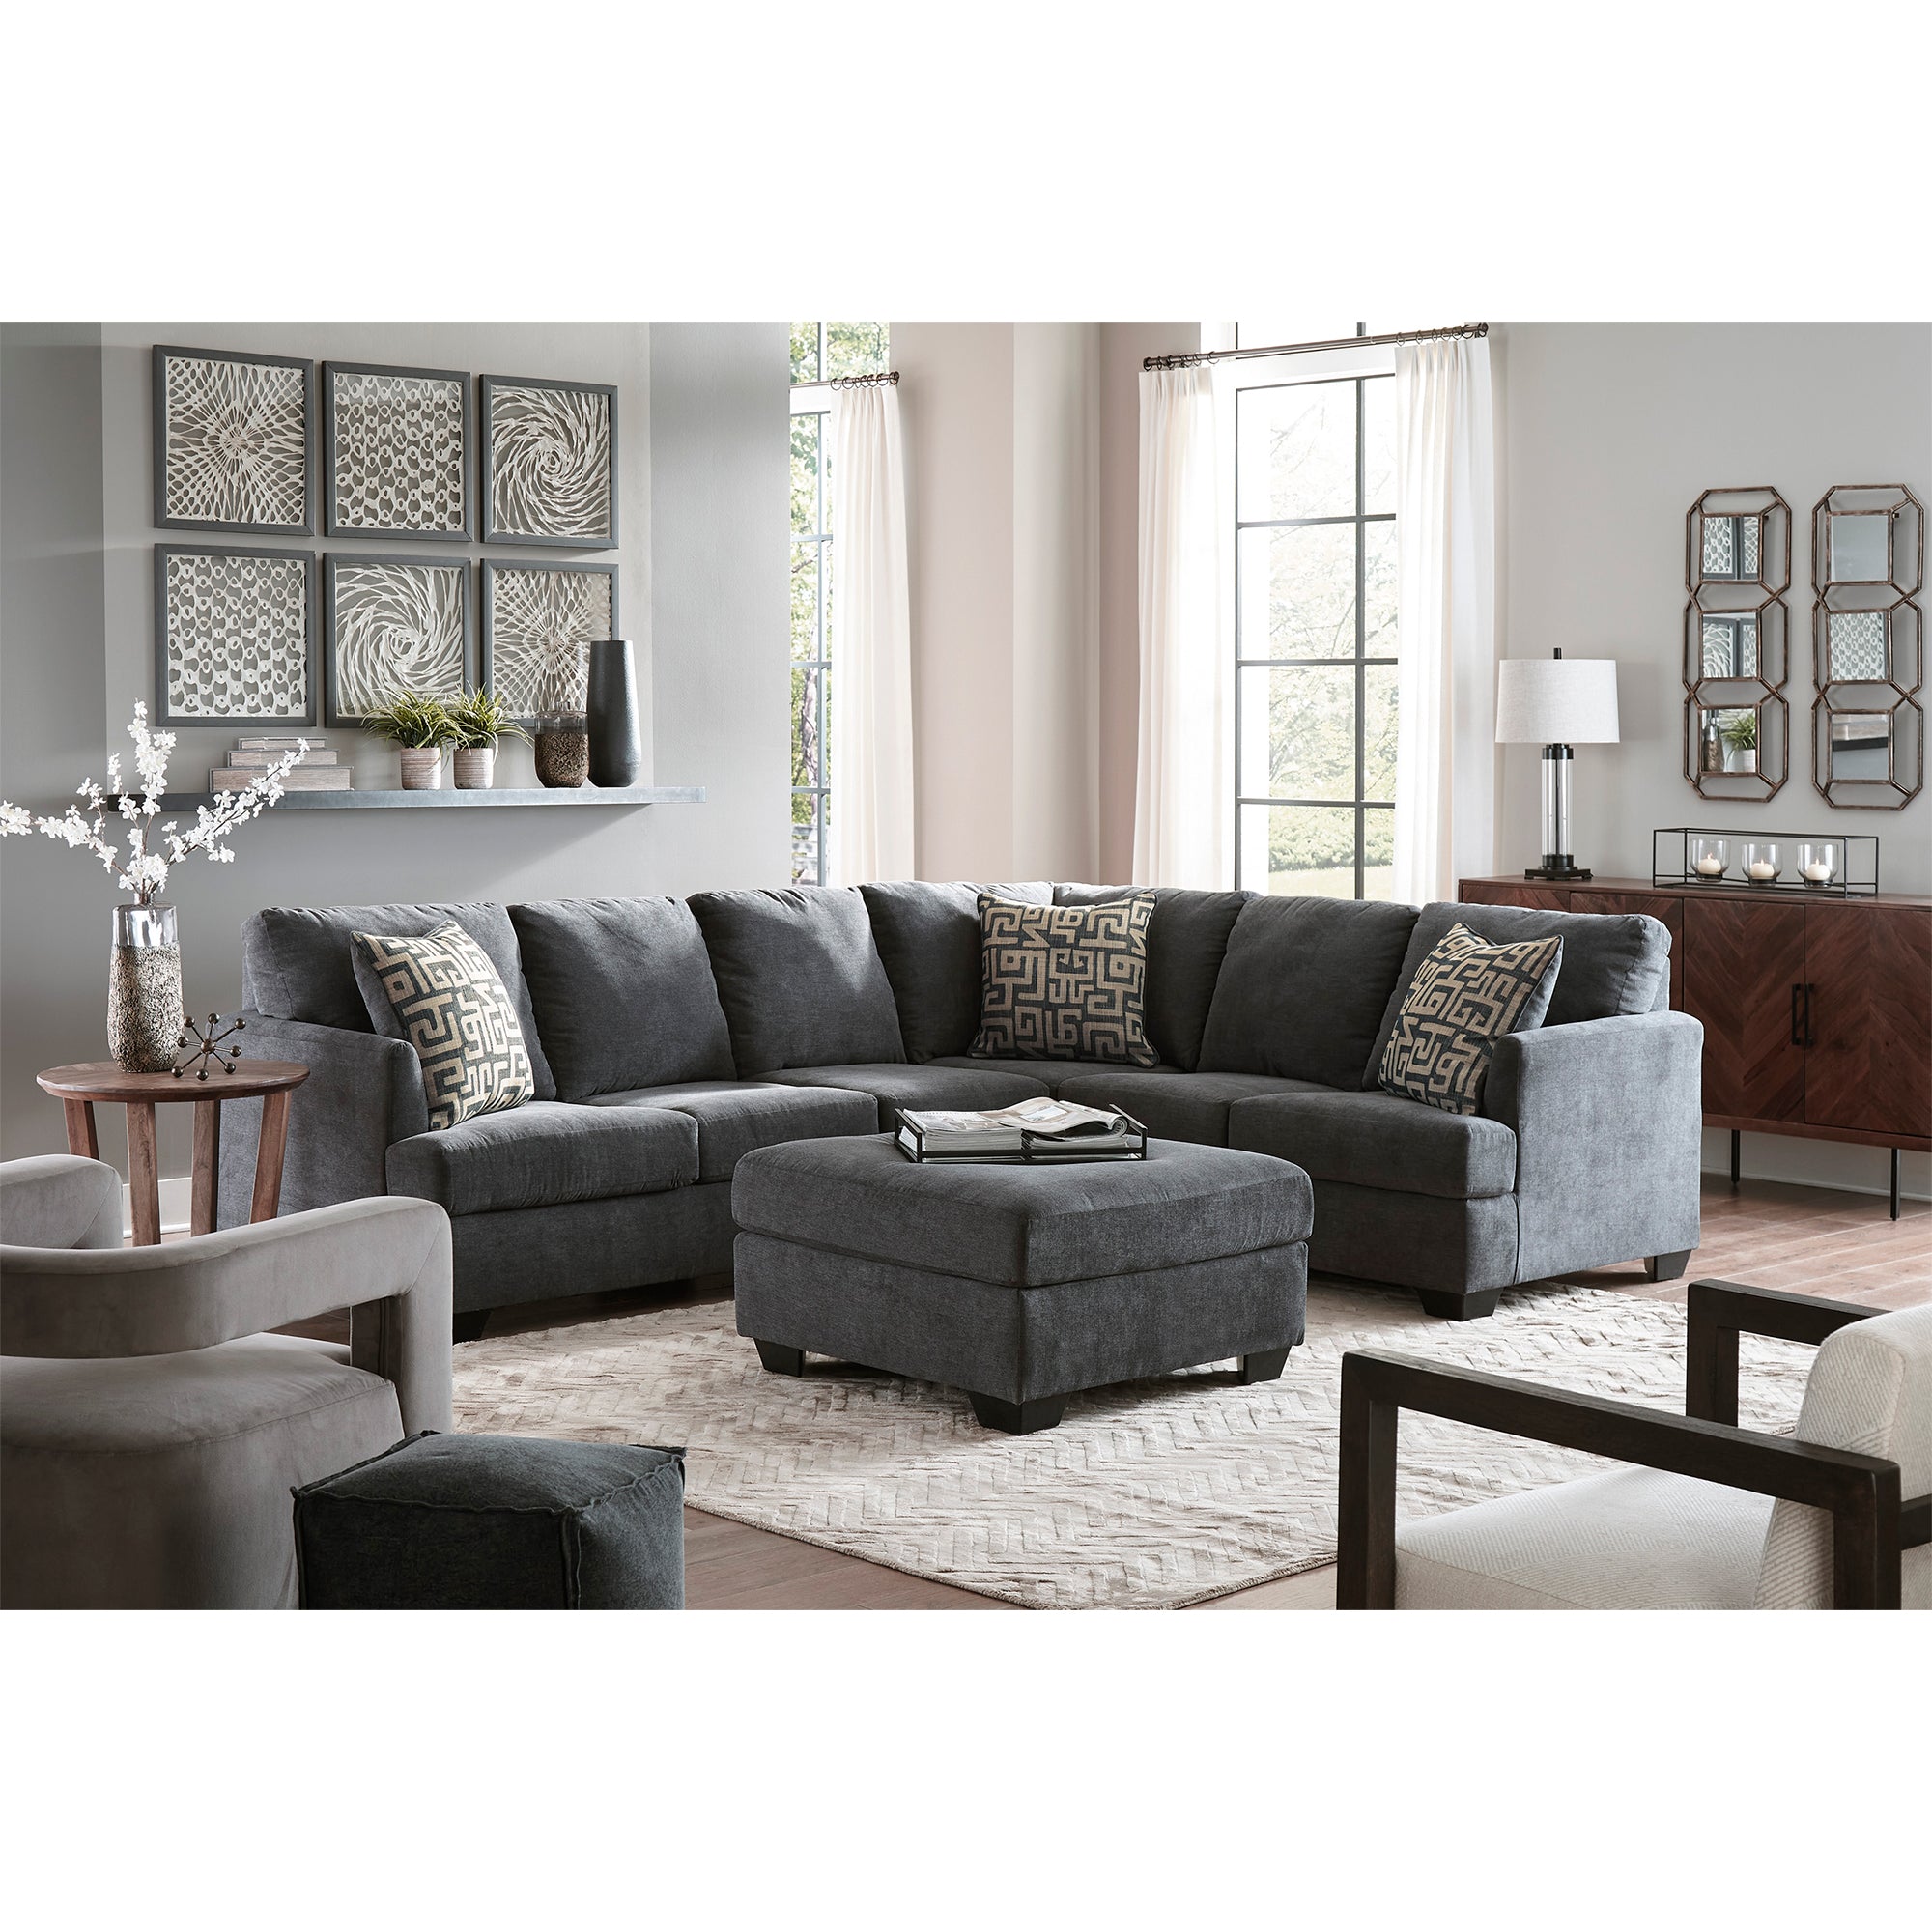 Ambrielle 3-Piece Sectional in Gunmetal Color